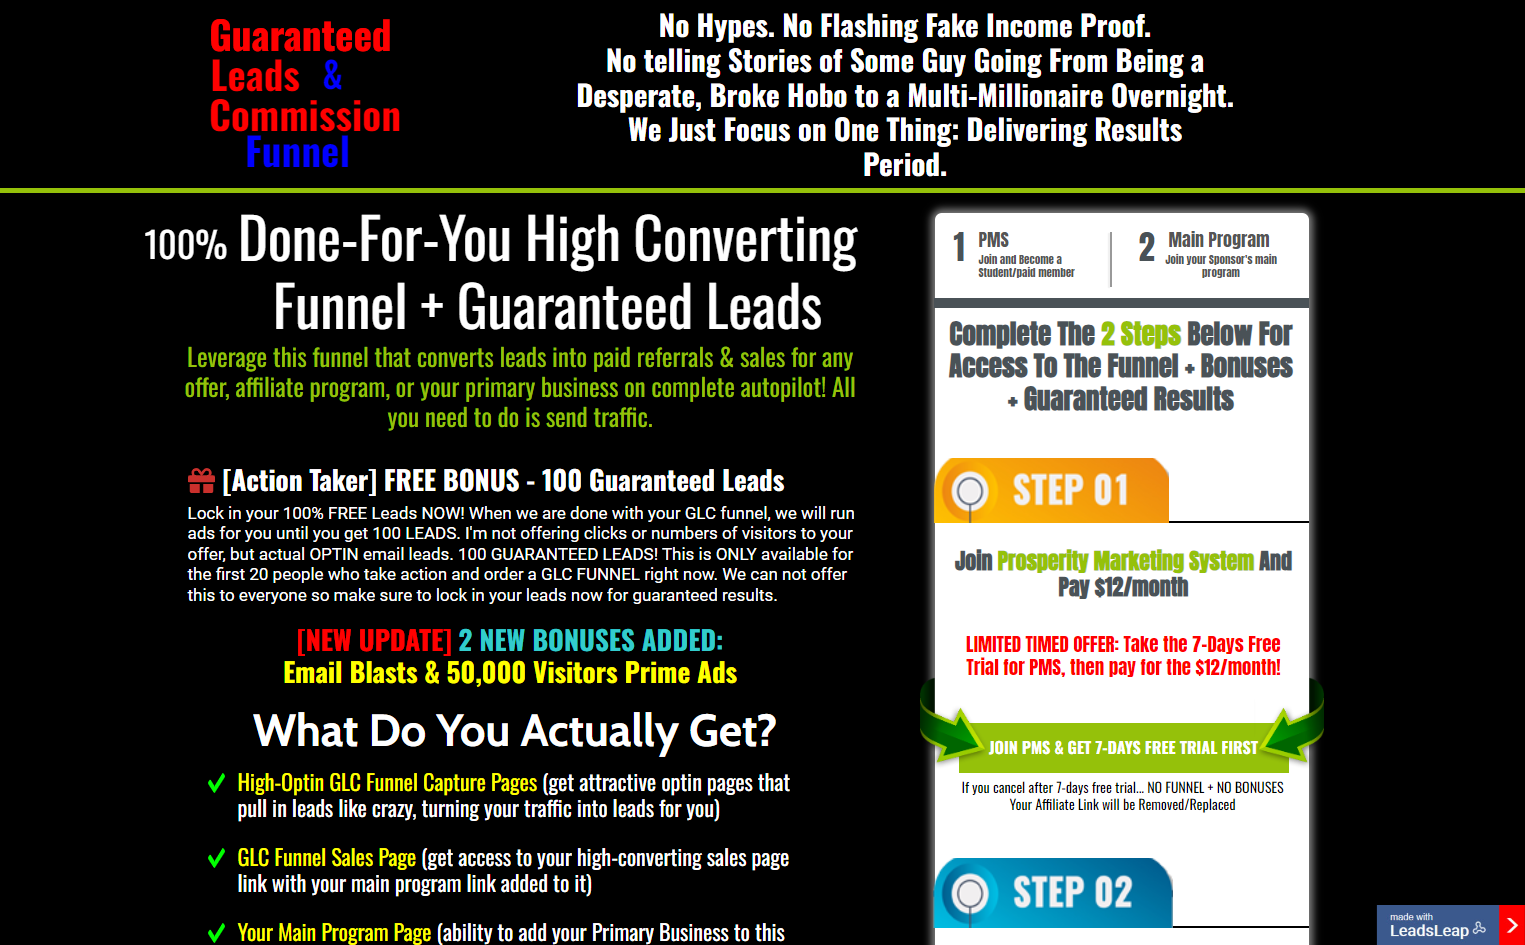 Viral Lead Generation For Nexus and Prosperity Marketing